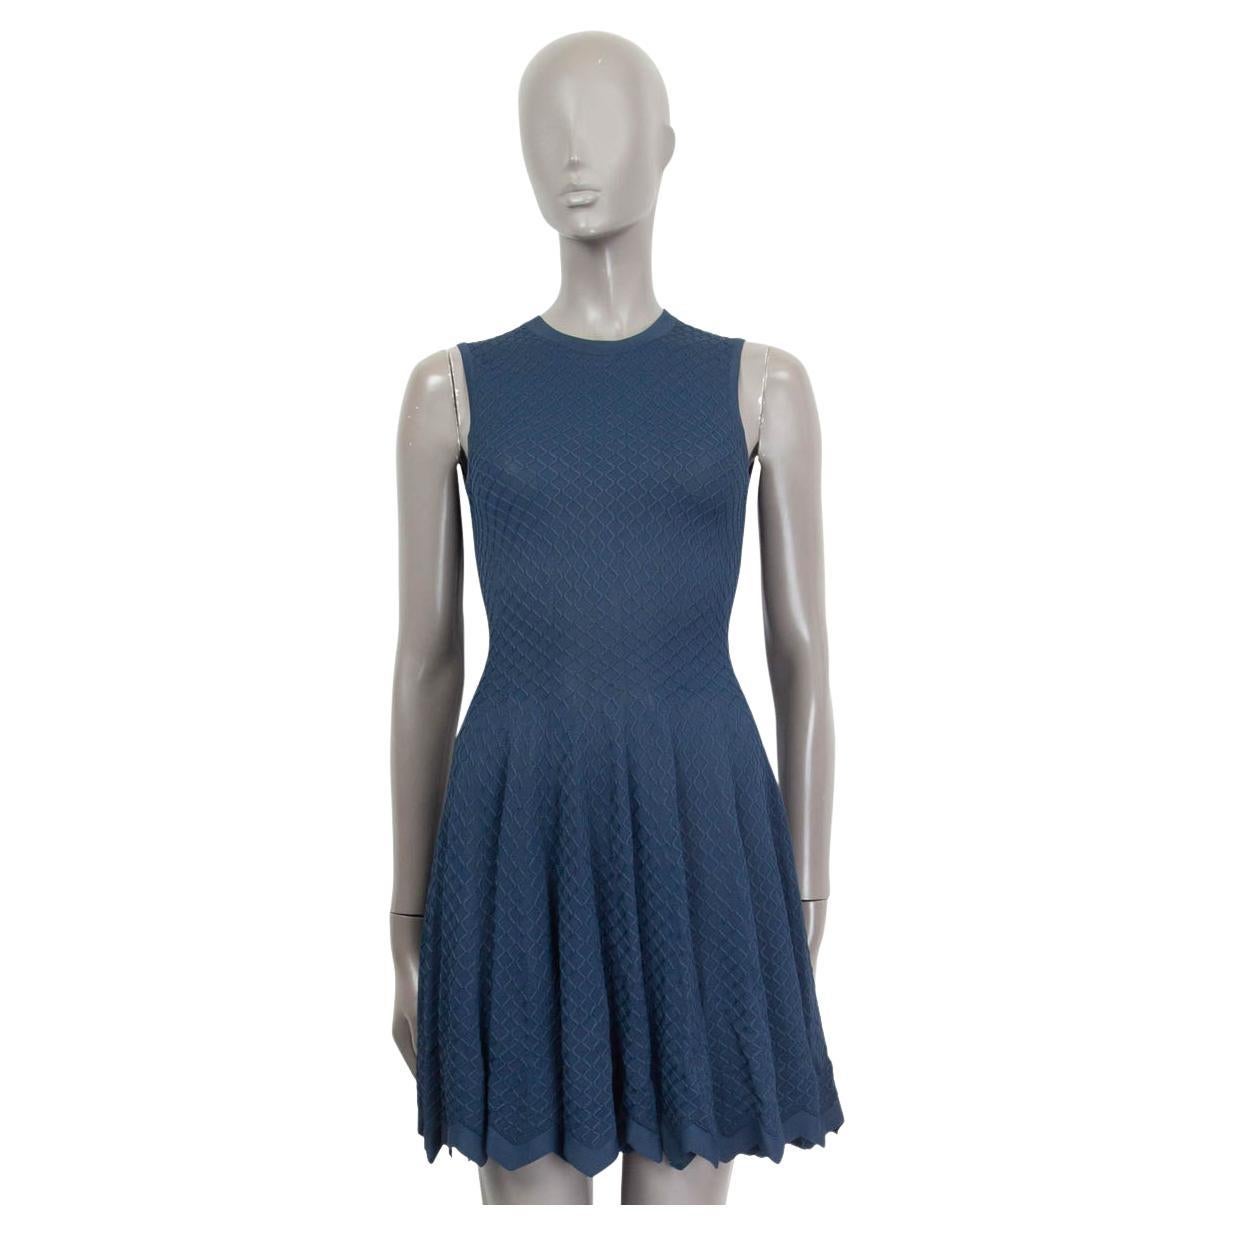 Azzedine Alaia “New Look” Dress For Sale at 1stDibs